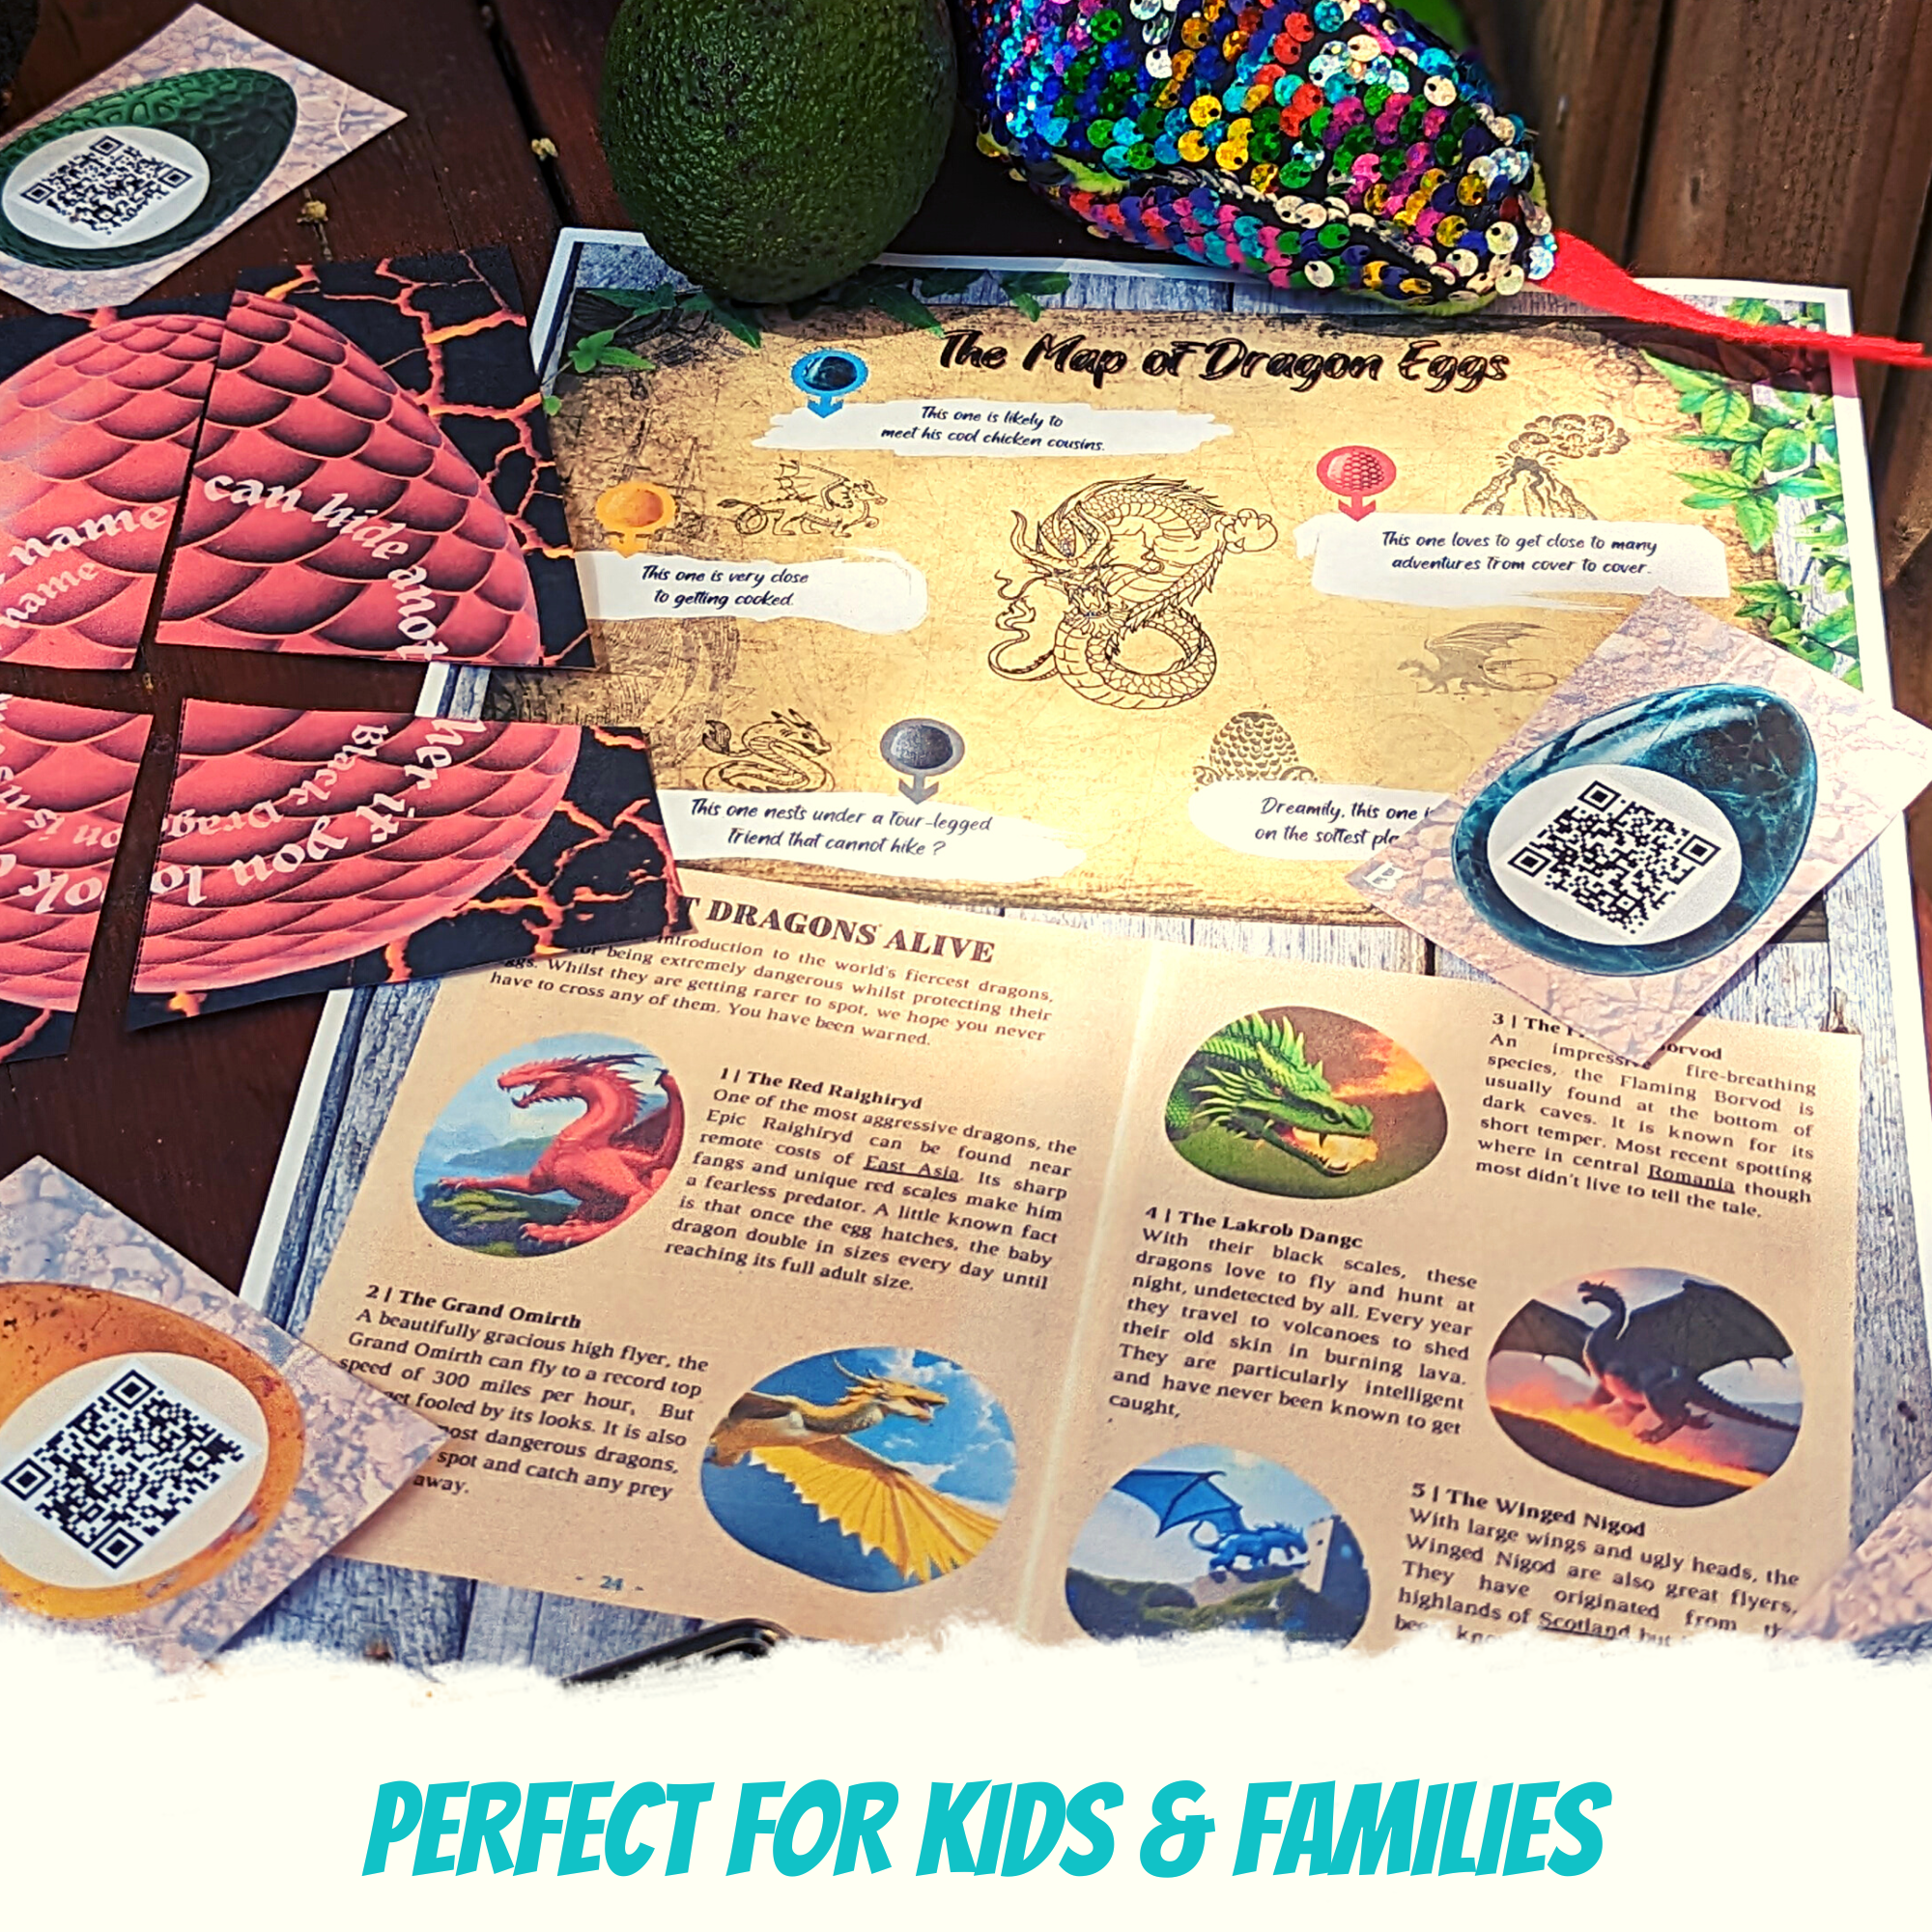 Great Wizard Escape game for kids at home fans of harry potter . Family activity like a scavenger hunt- dragons